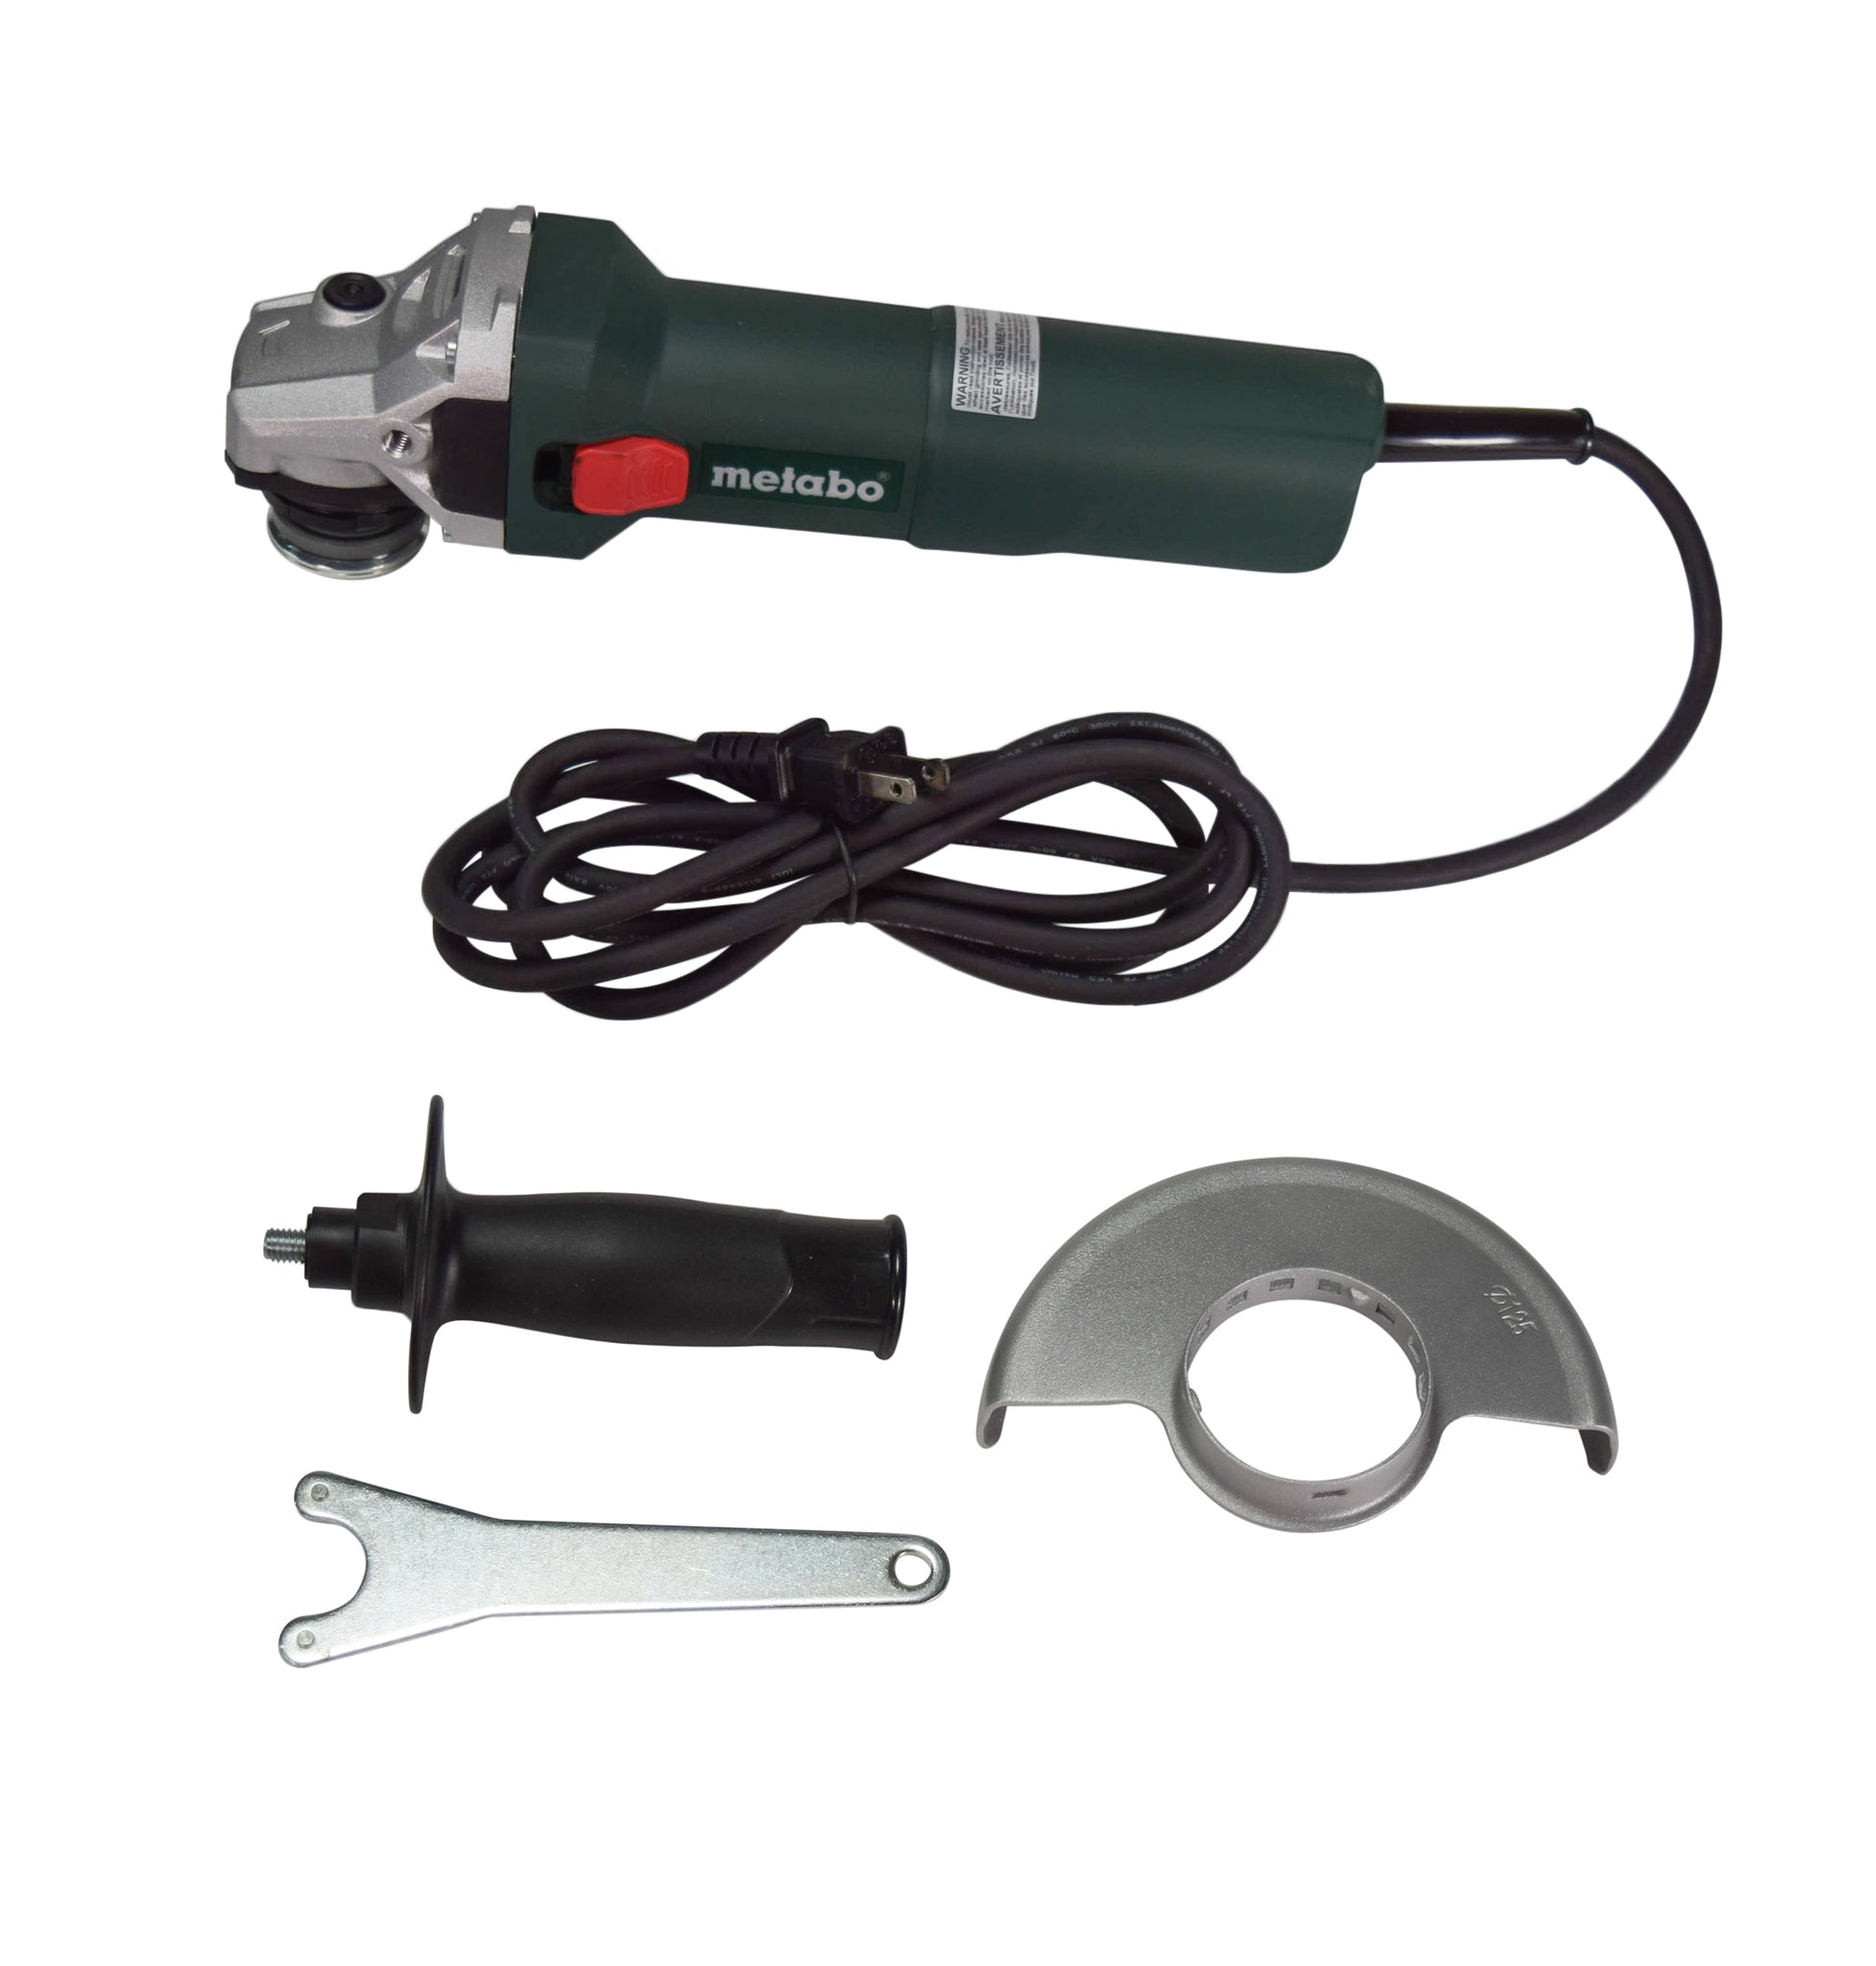 Metabo-603614420-W-1100-125-11-Amp-12-000-RPM-4.5-5-Corded-Angle-Grind-CLONE-image-1